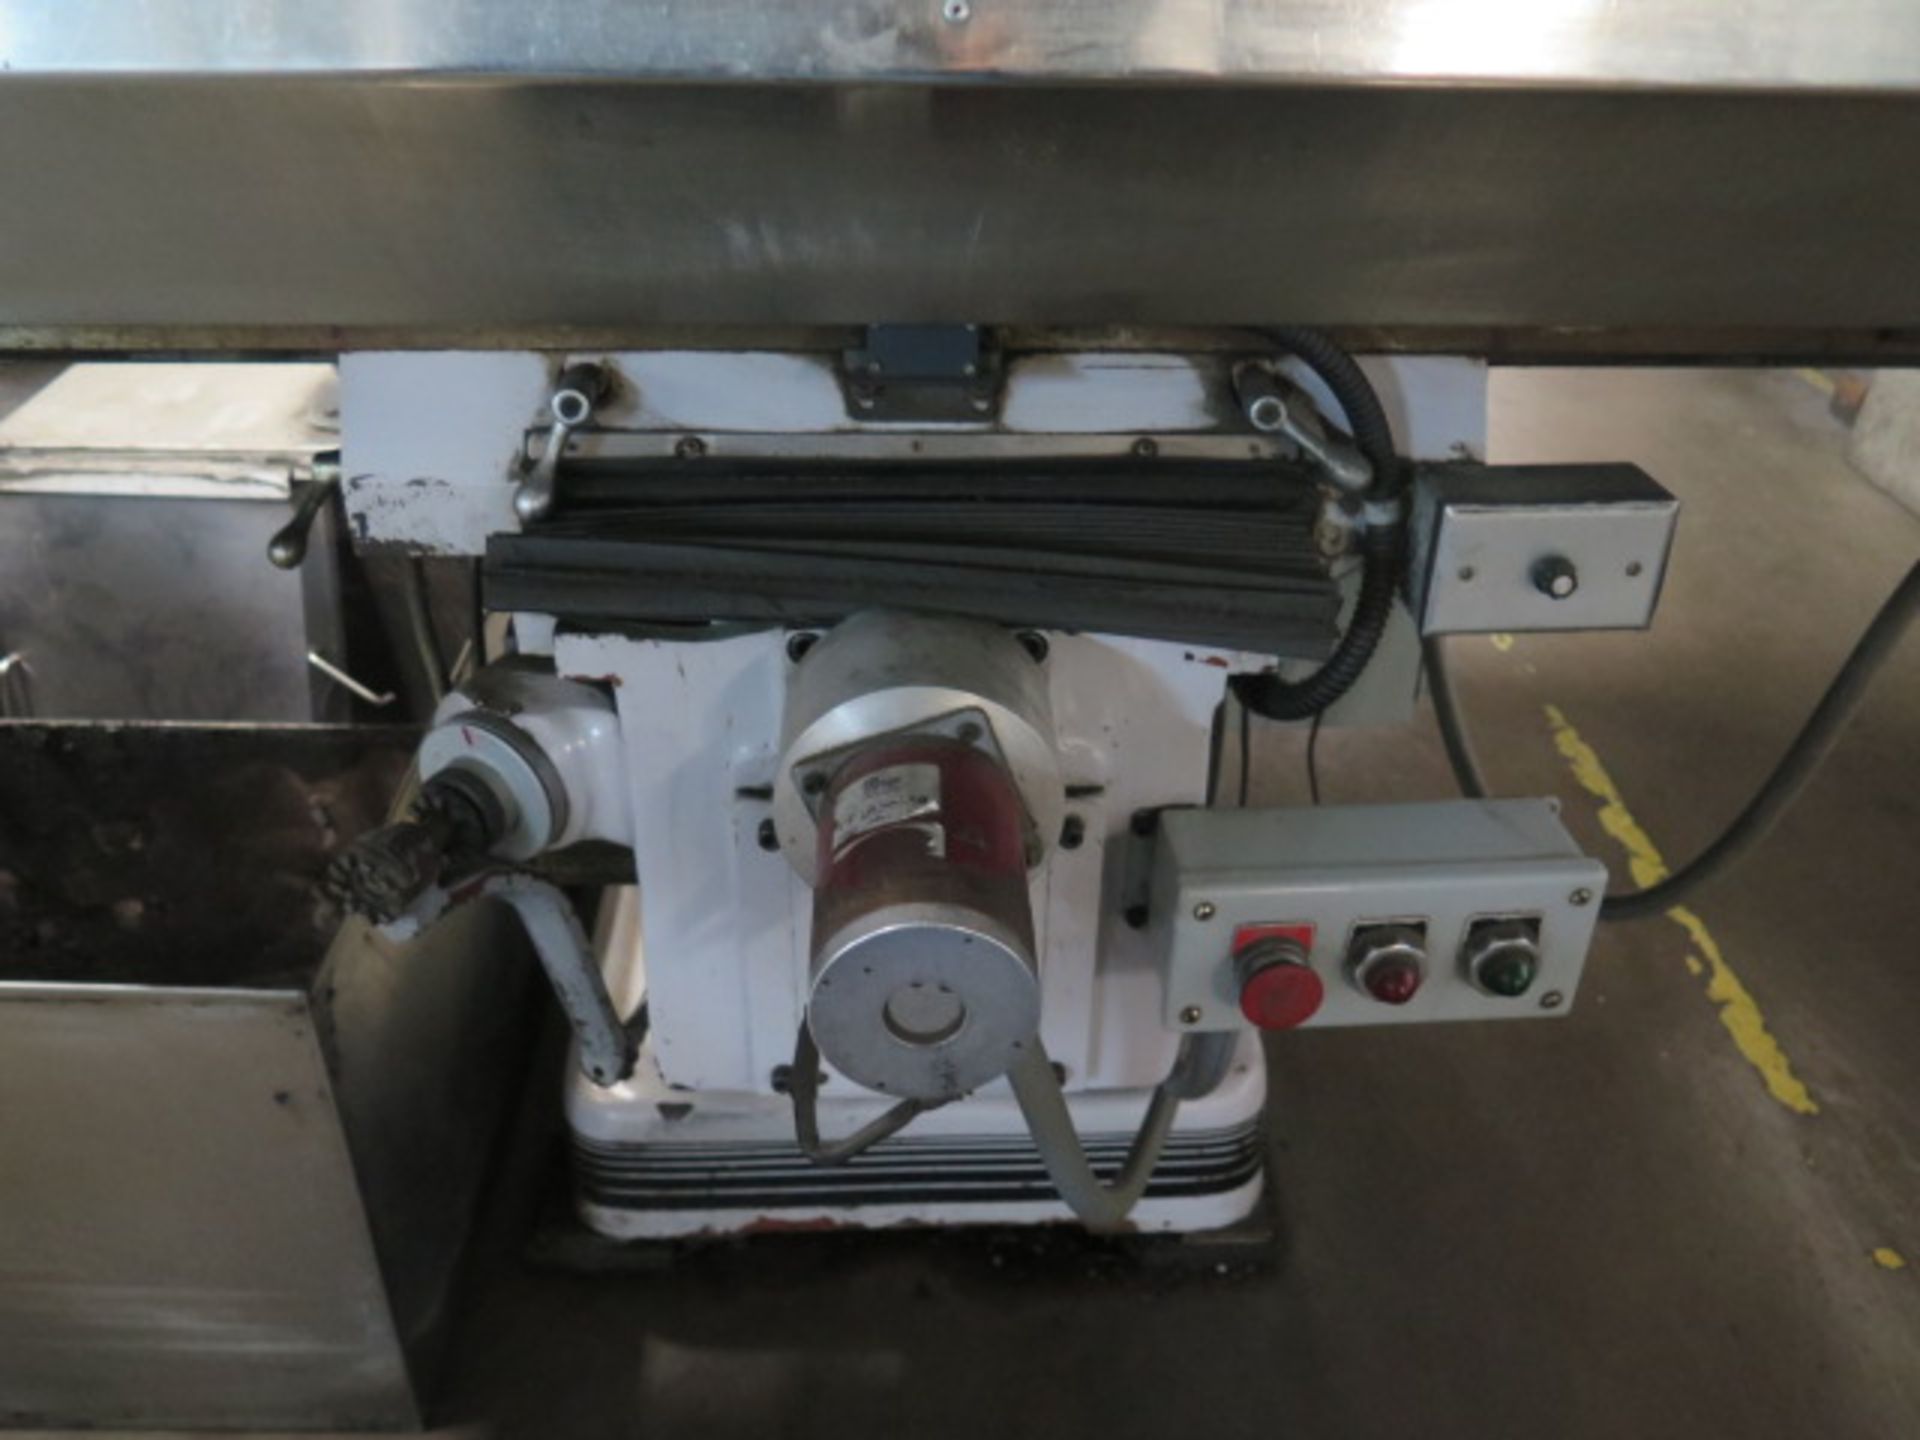 Custom 4-Axis CNC Tool and Cutter Grinders w/ Compumotor 4000 Controls (SOLD AS-IS - NO WARRANTY) - Image 8 of 9